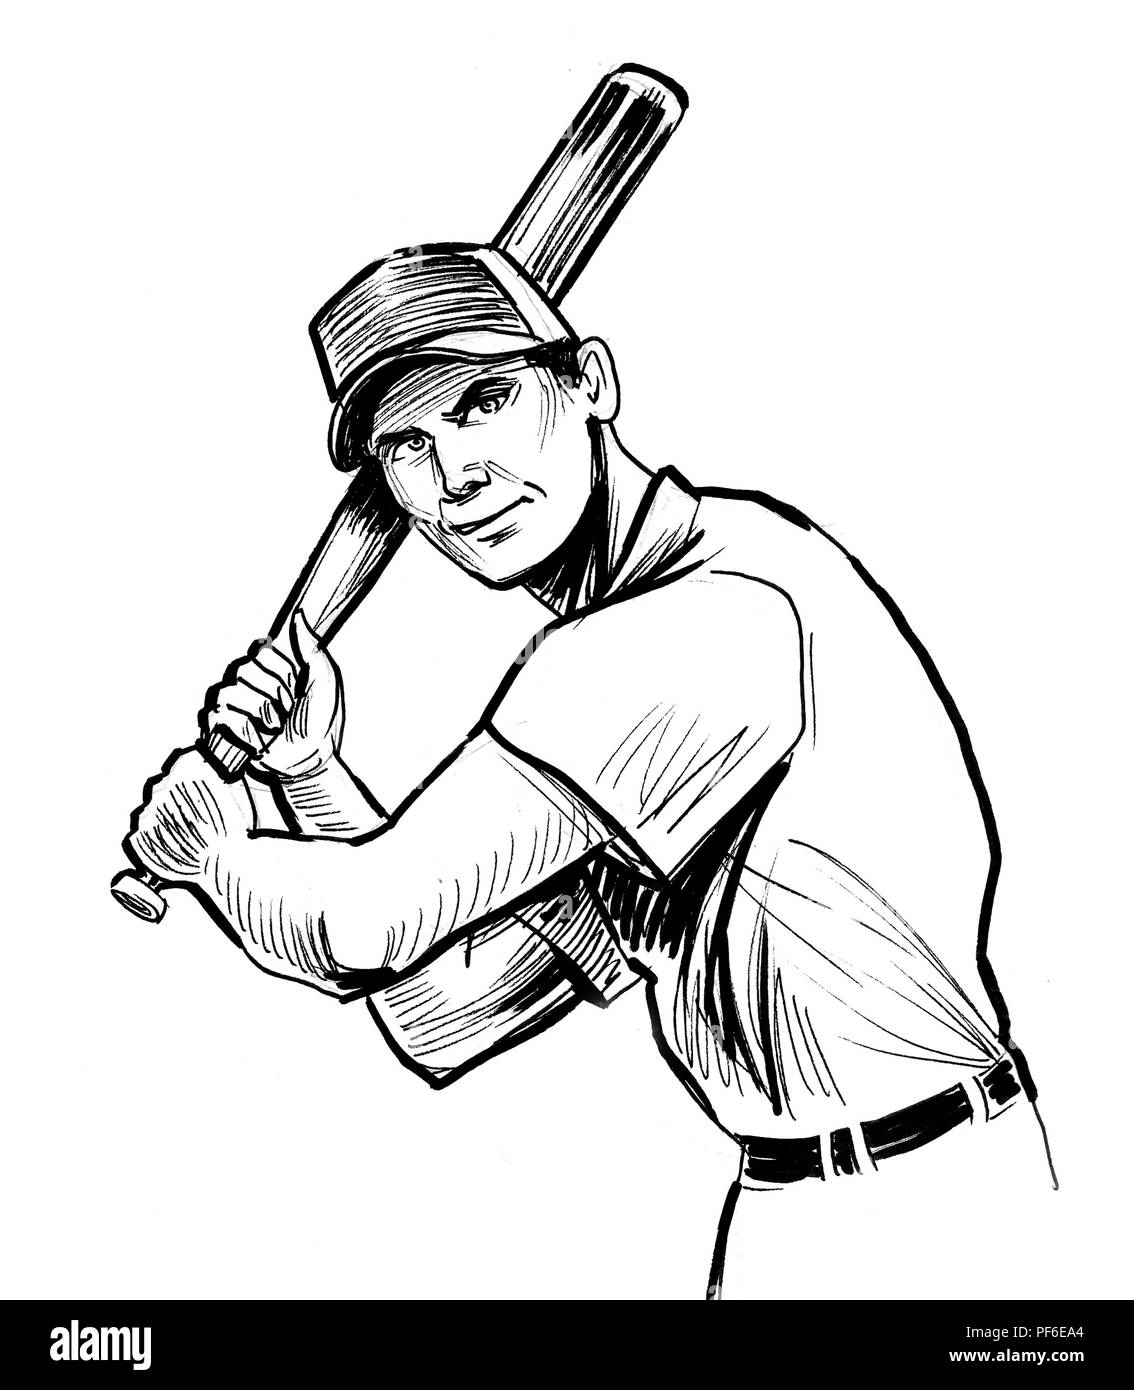 Baseball player. Ink black and white drawing - Stock Illustration